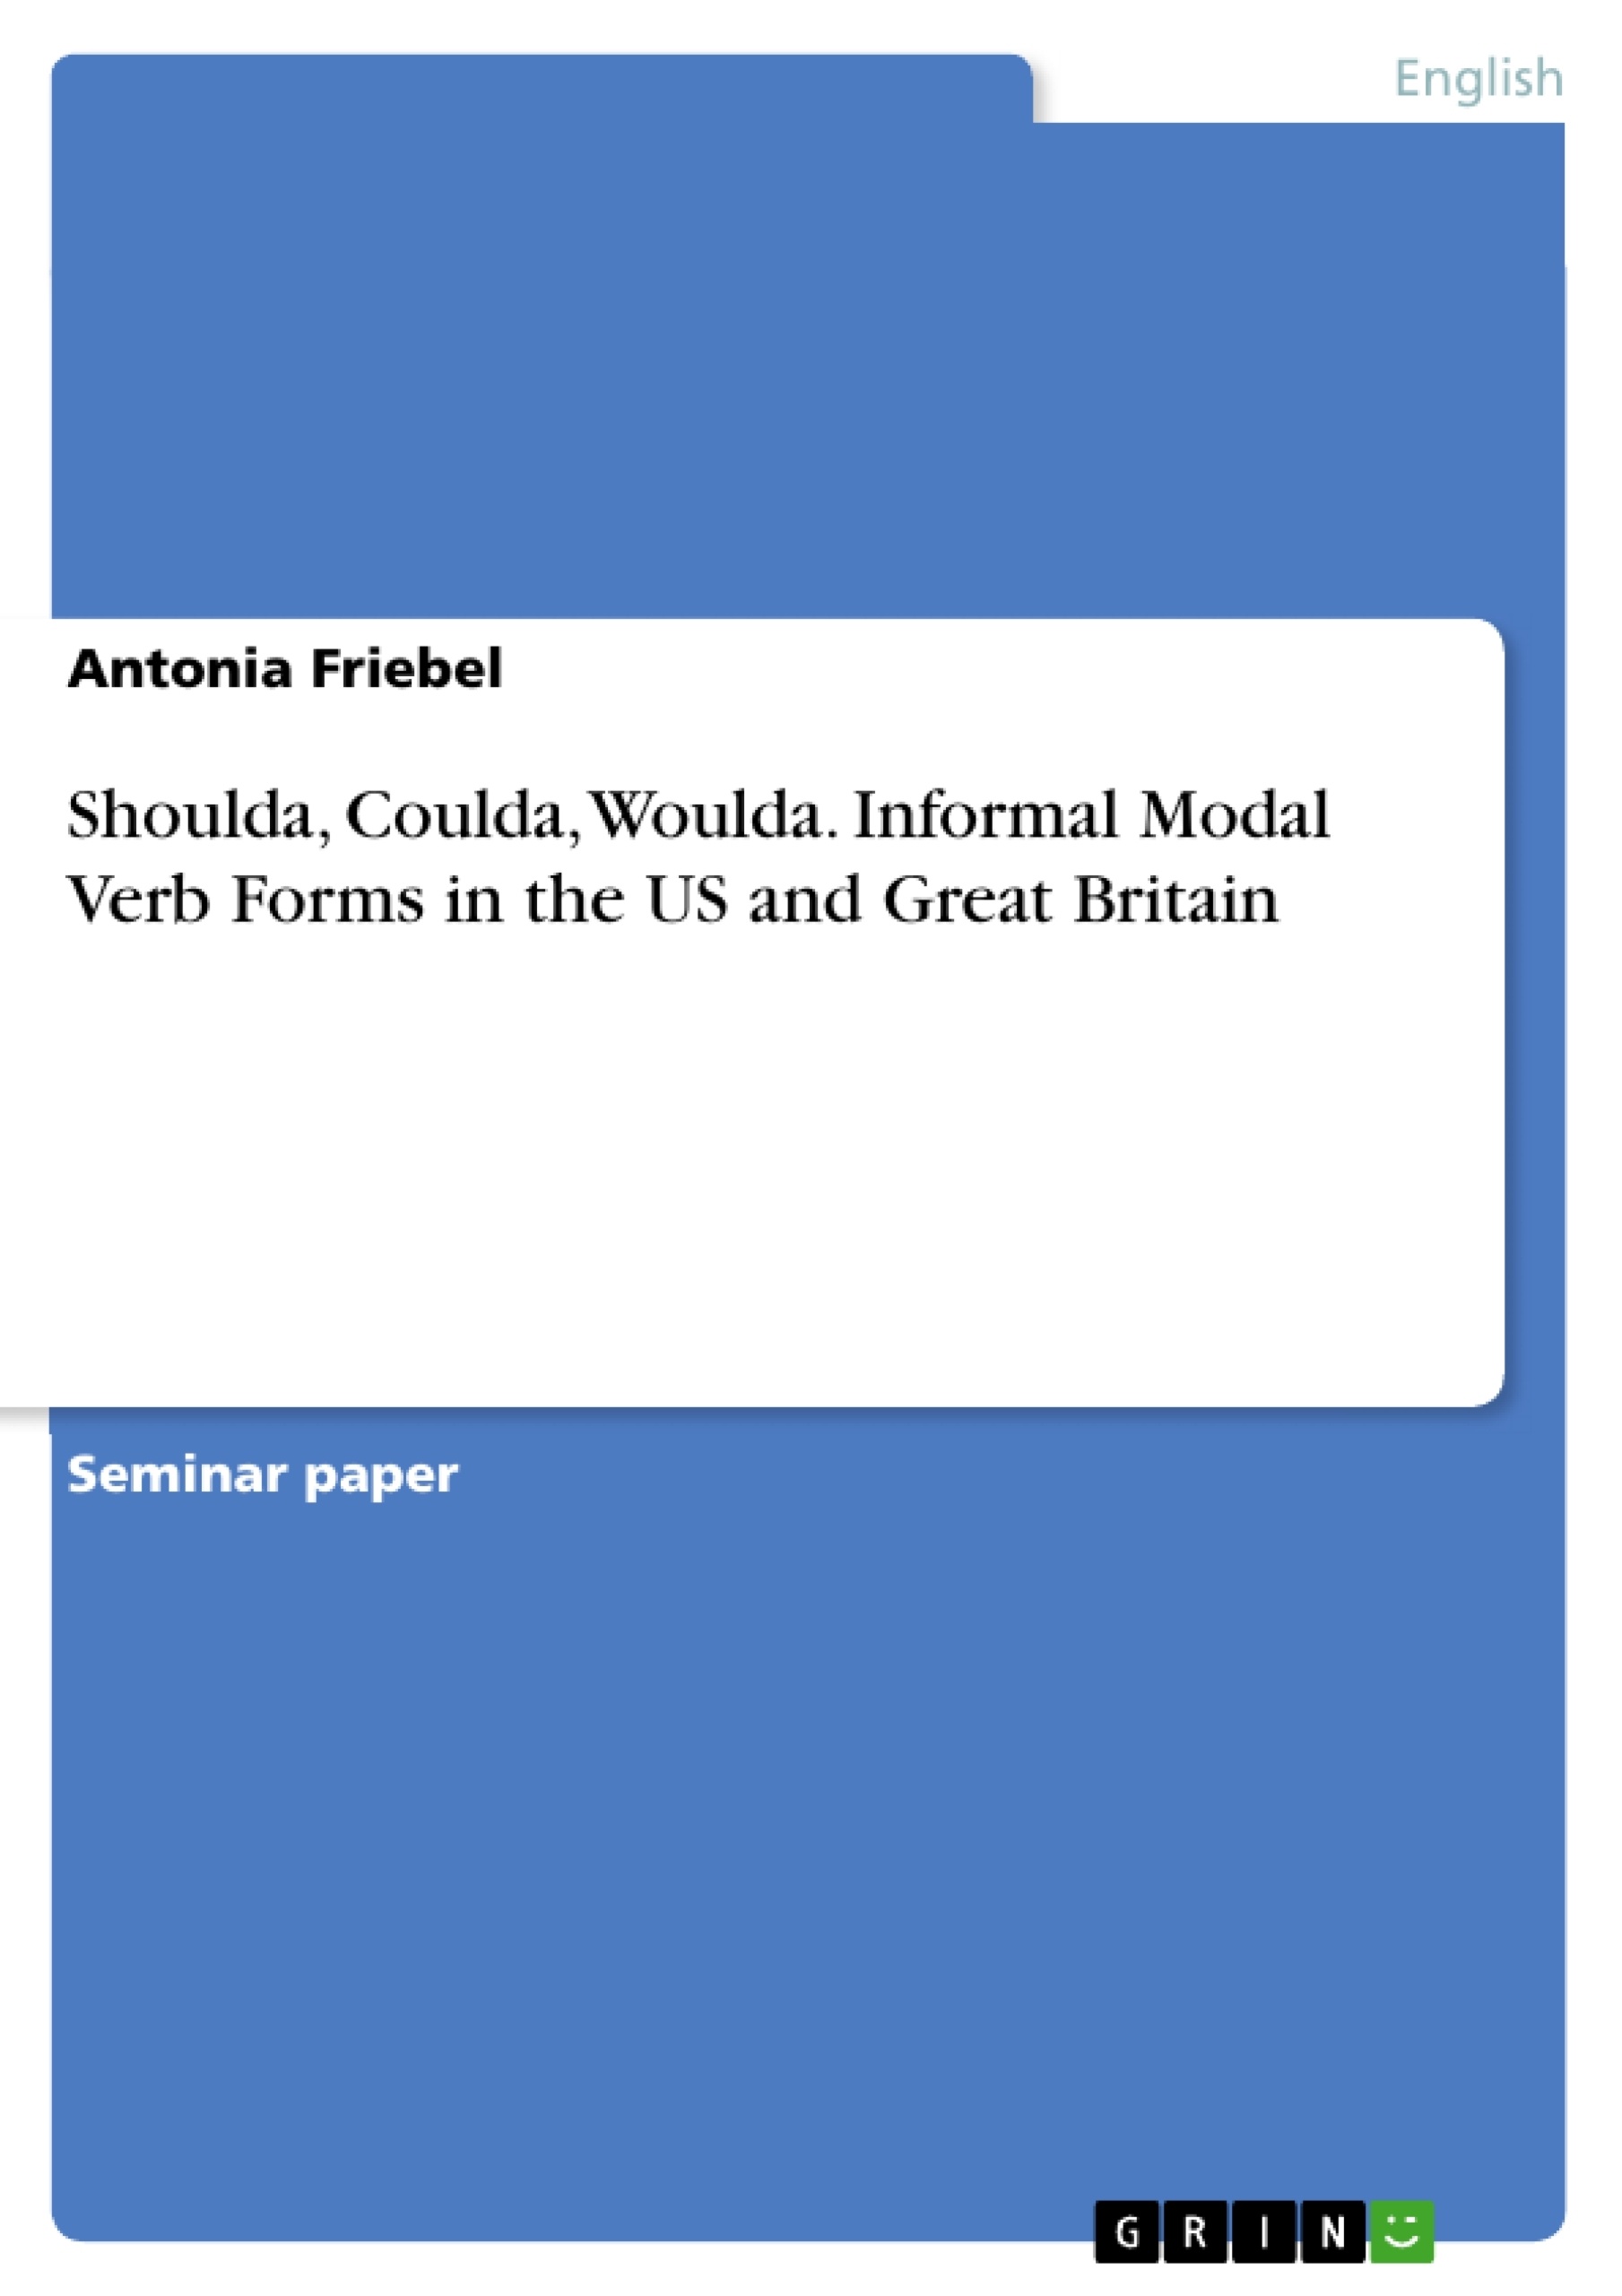 Title: Shoulda, Coulda, Woulda. Informal Modal Verb Forms in the US and Great Britain